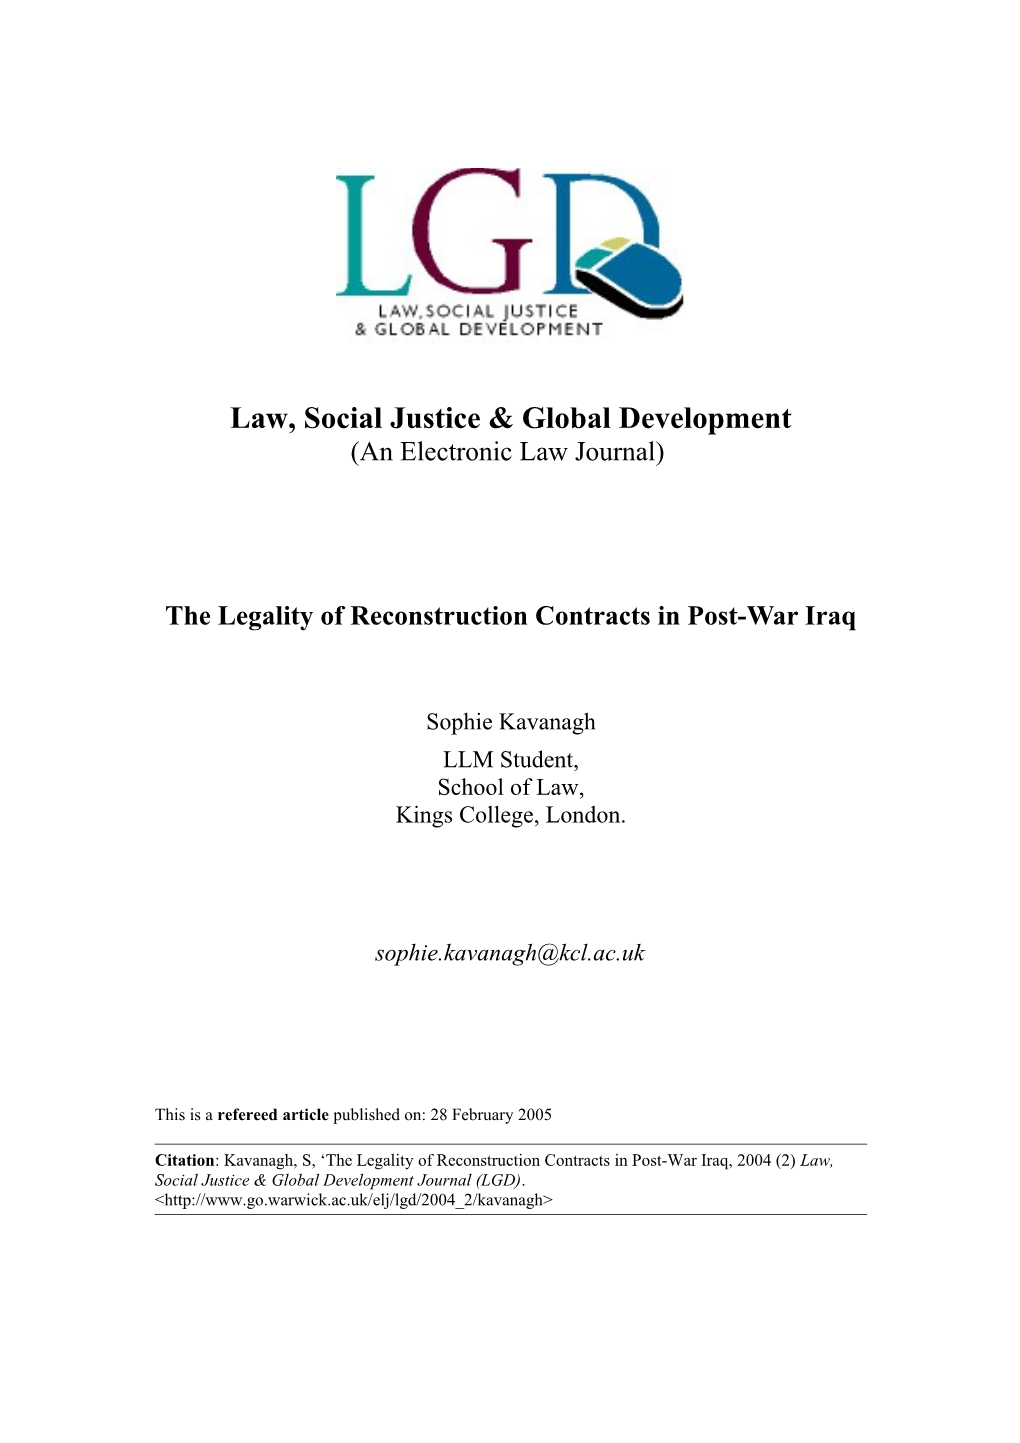 The Legality of Reconstruction Contracts in Post-War Iraq